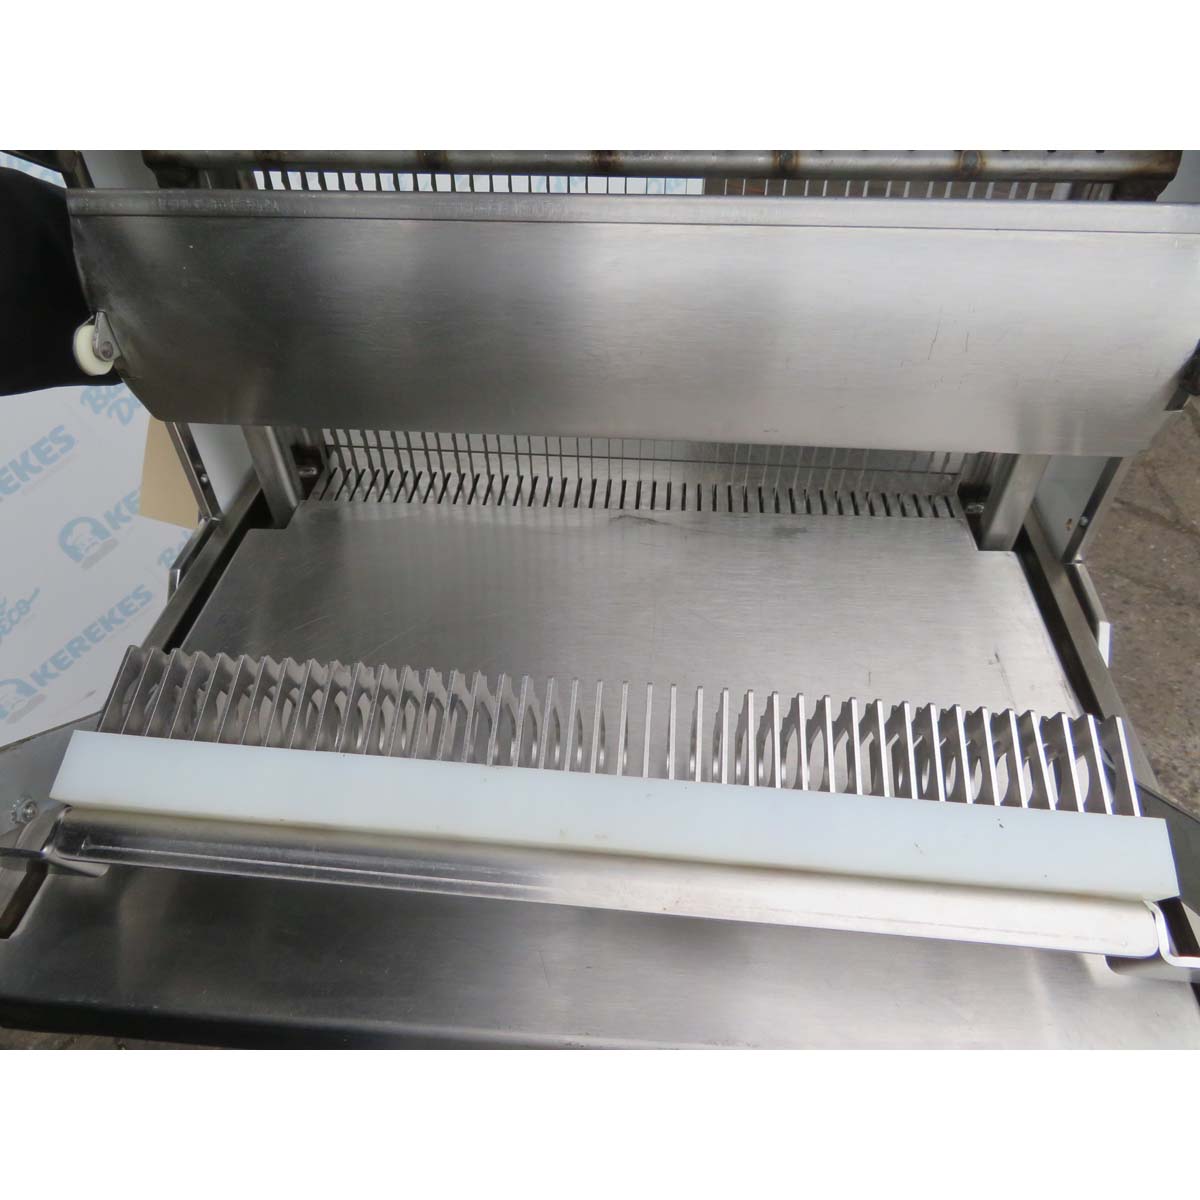 Oliver 777 Bread Slicer 3/8" Slices, Used Great Condition image 2